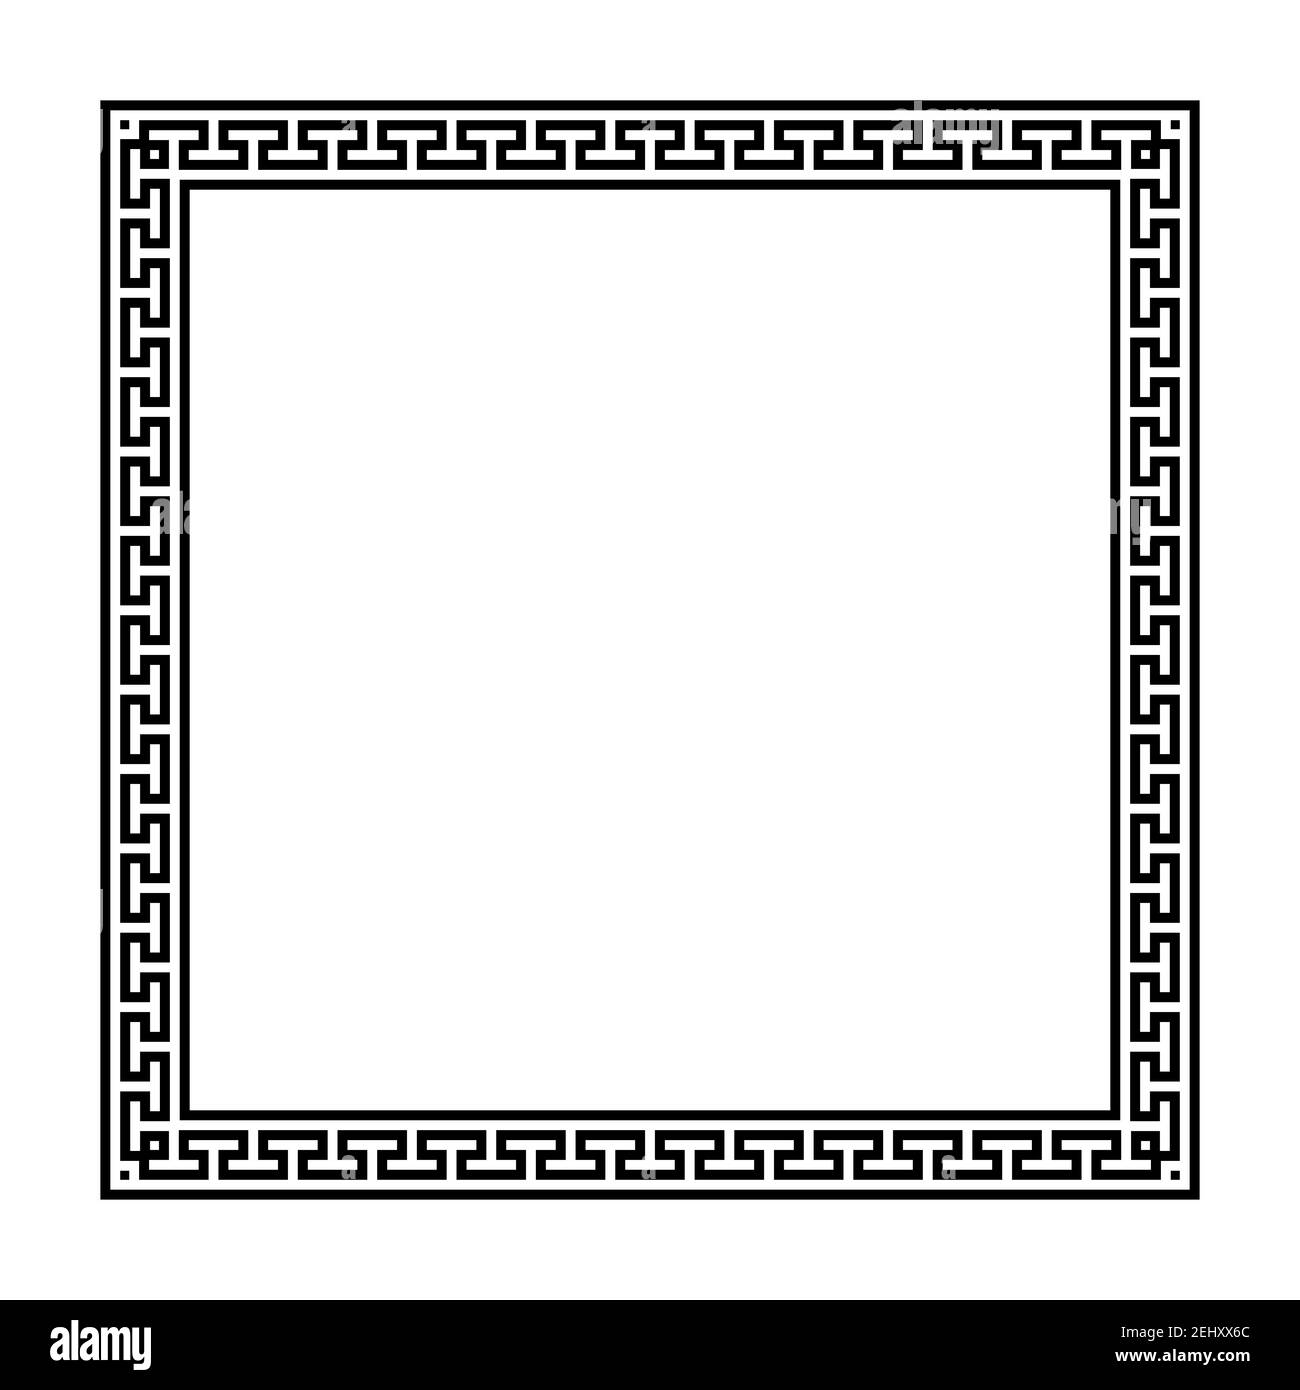 Square frame with seamless meander pattern. Decorative border, made of continuous lines, shaped into a repeated motif. Also known as Greek fret. Stock Photo